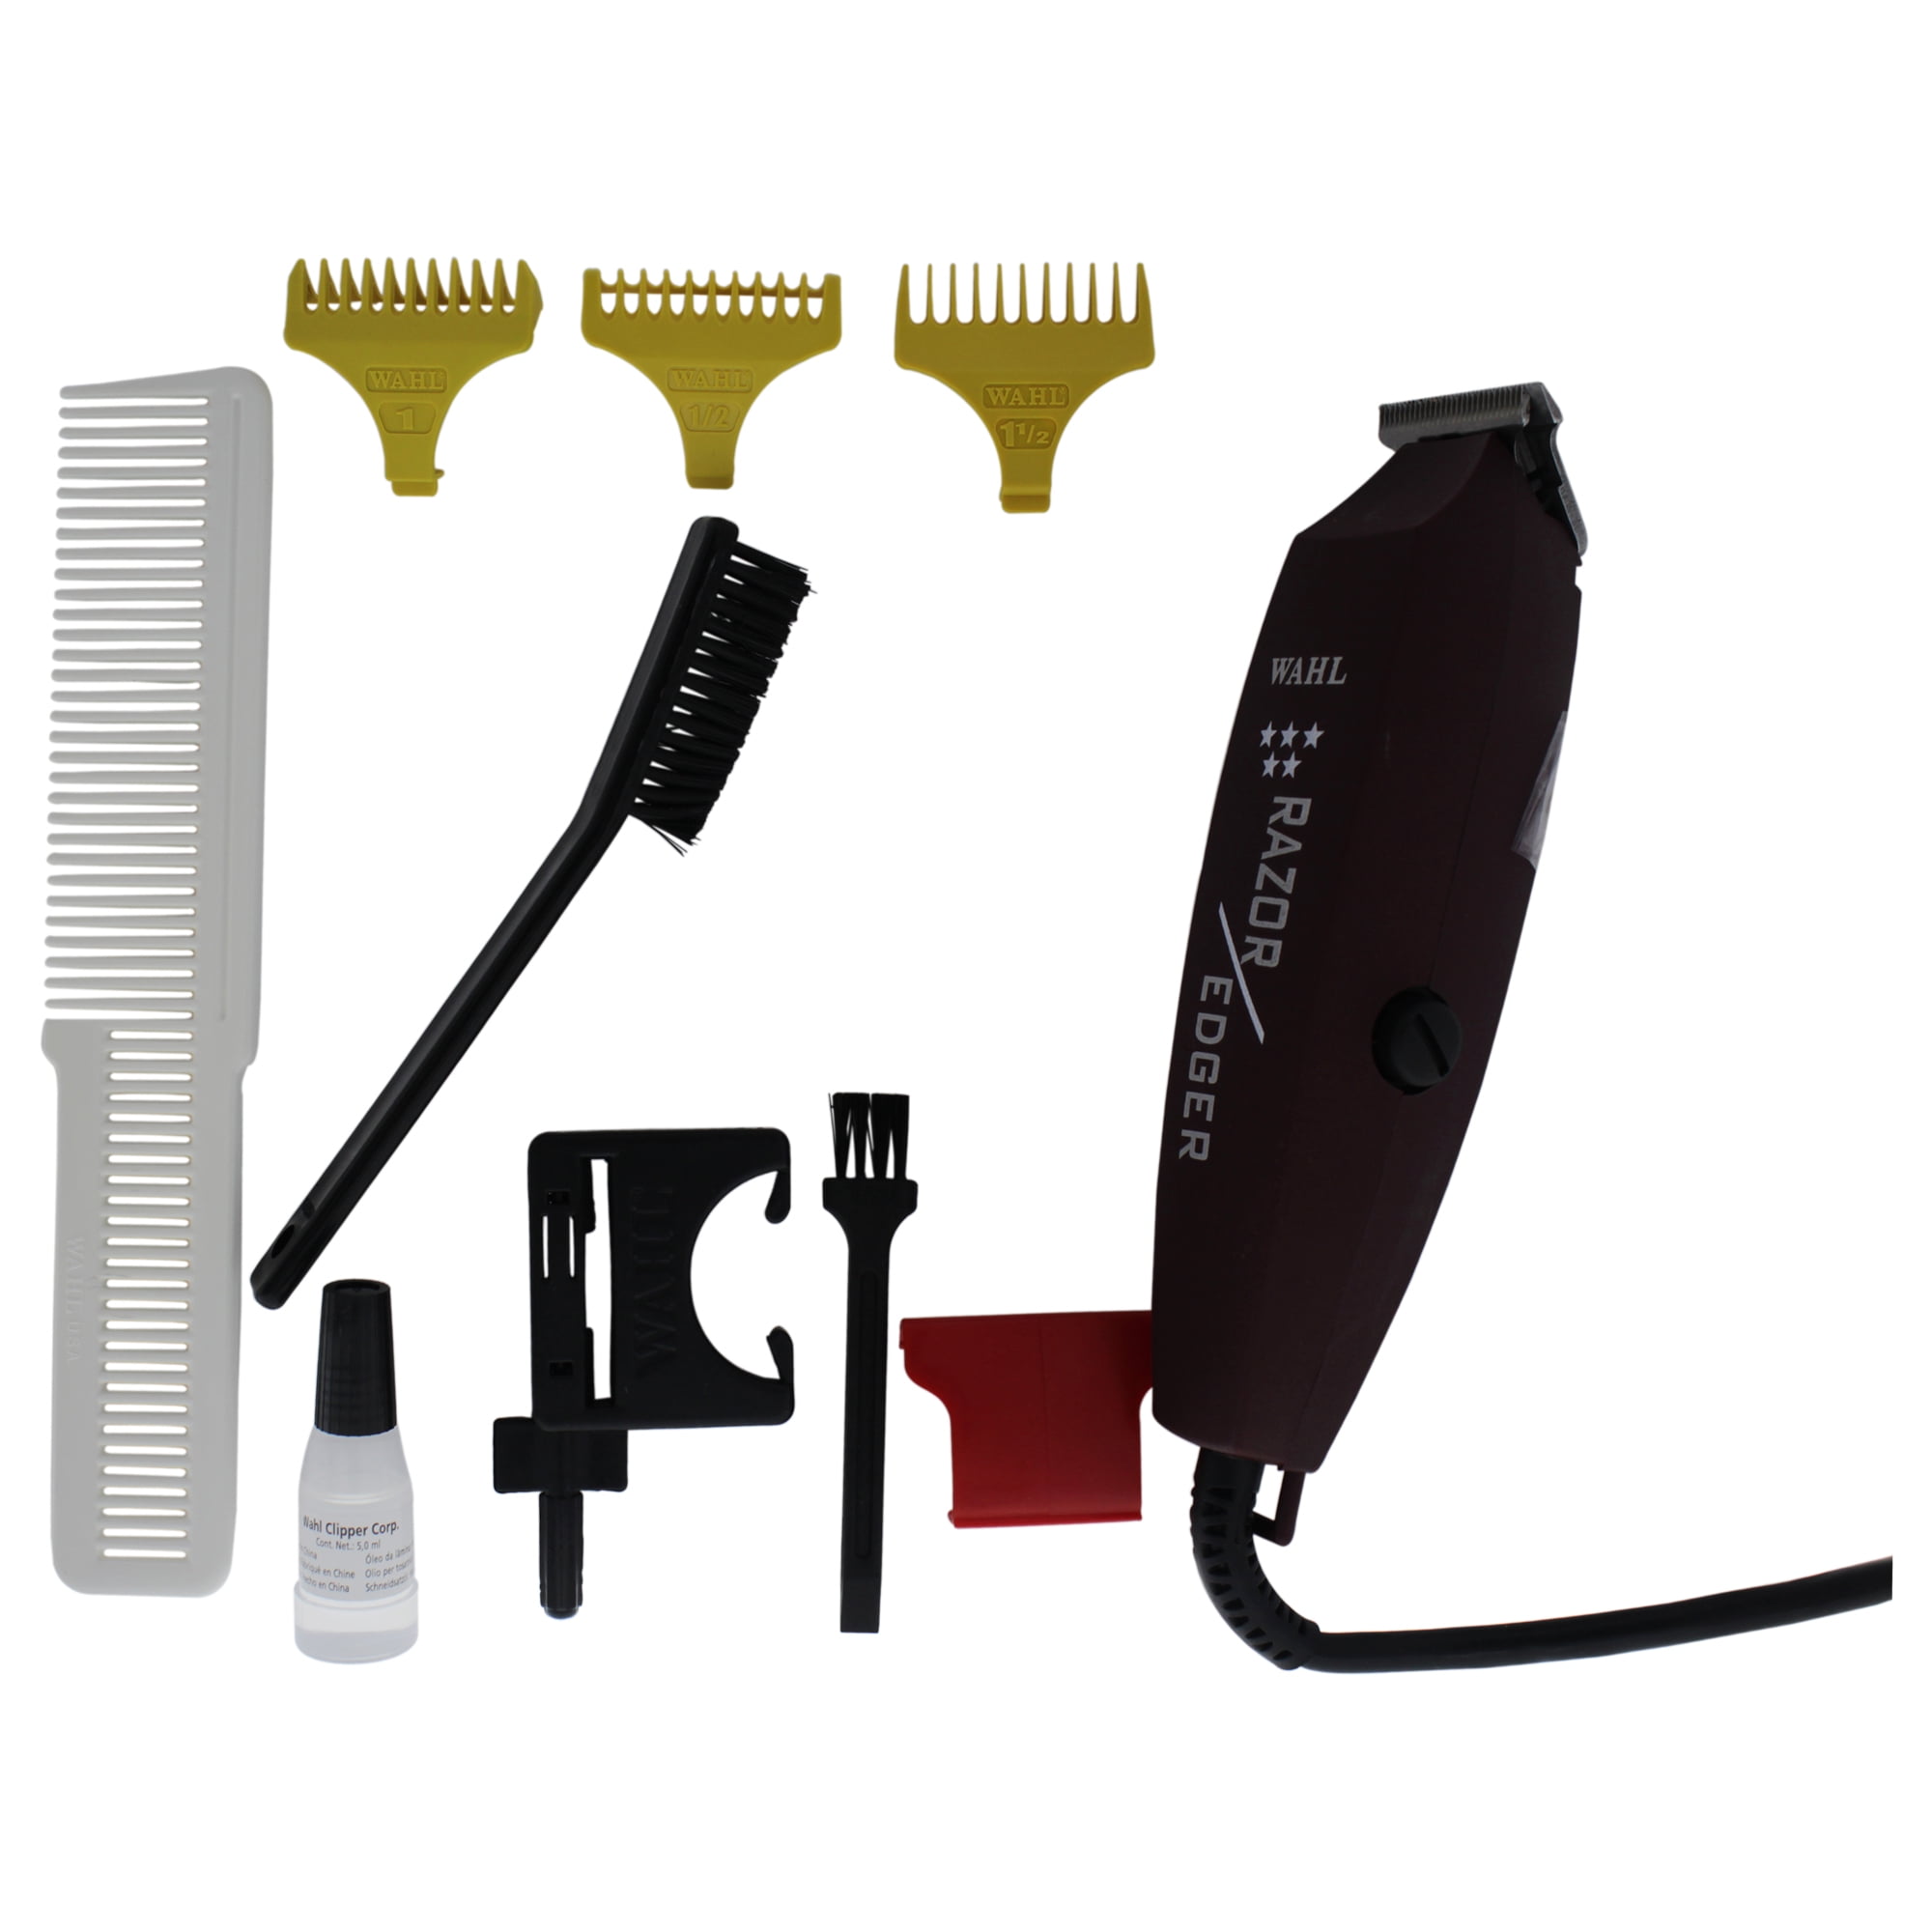 wahl edger clippers